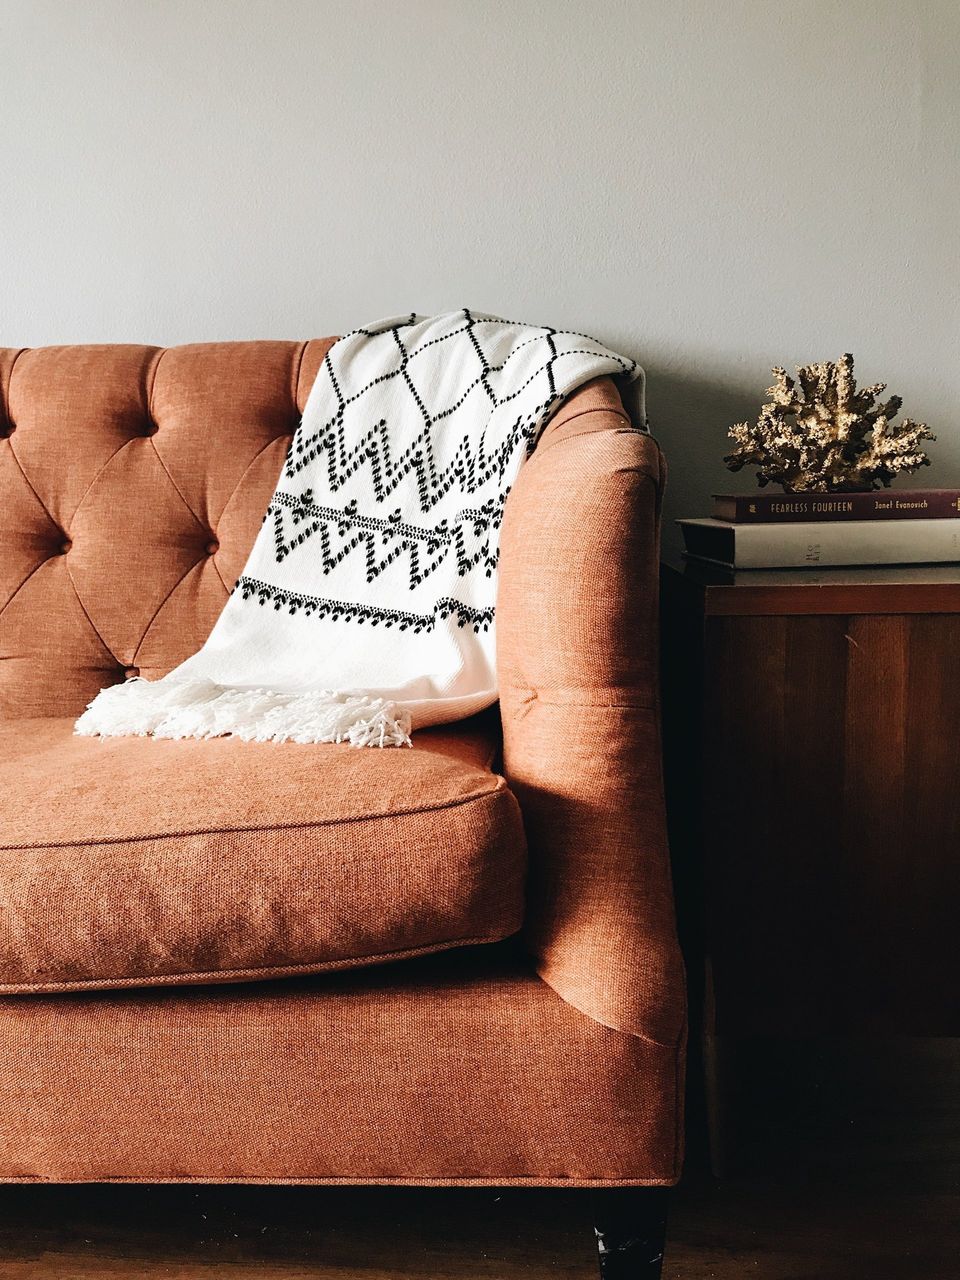 Cozy couch in living room with throw blanket